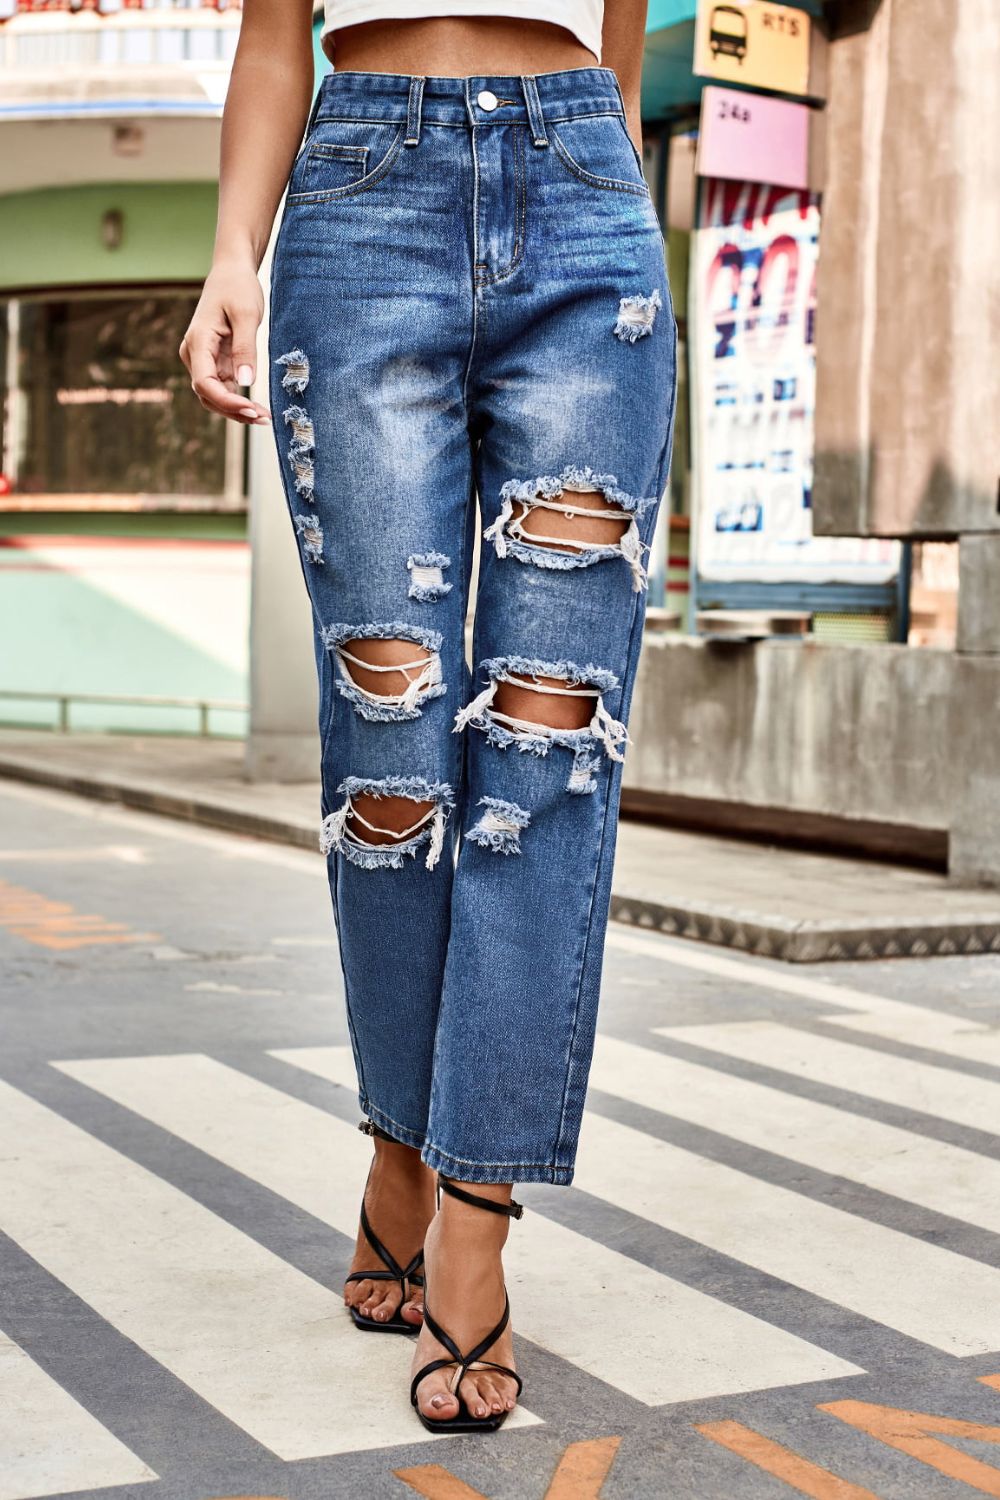 Distressed High Waist Straight Jeans